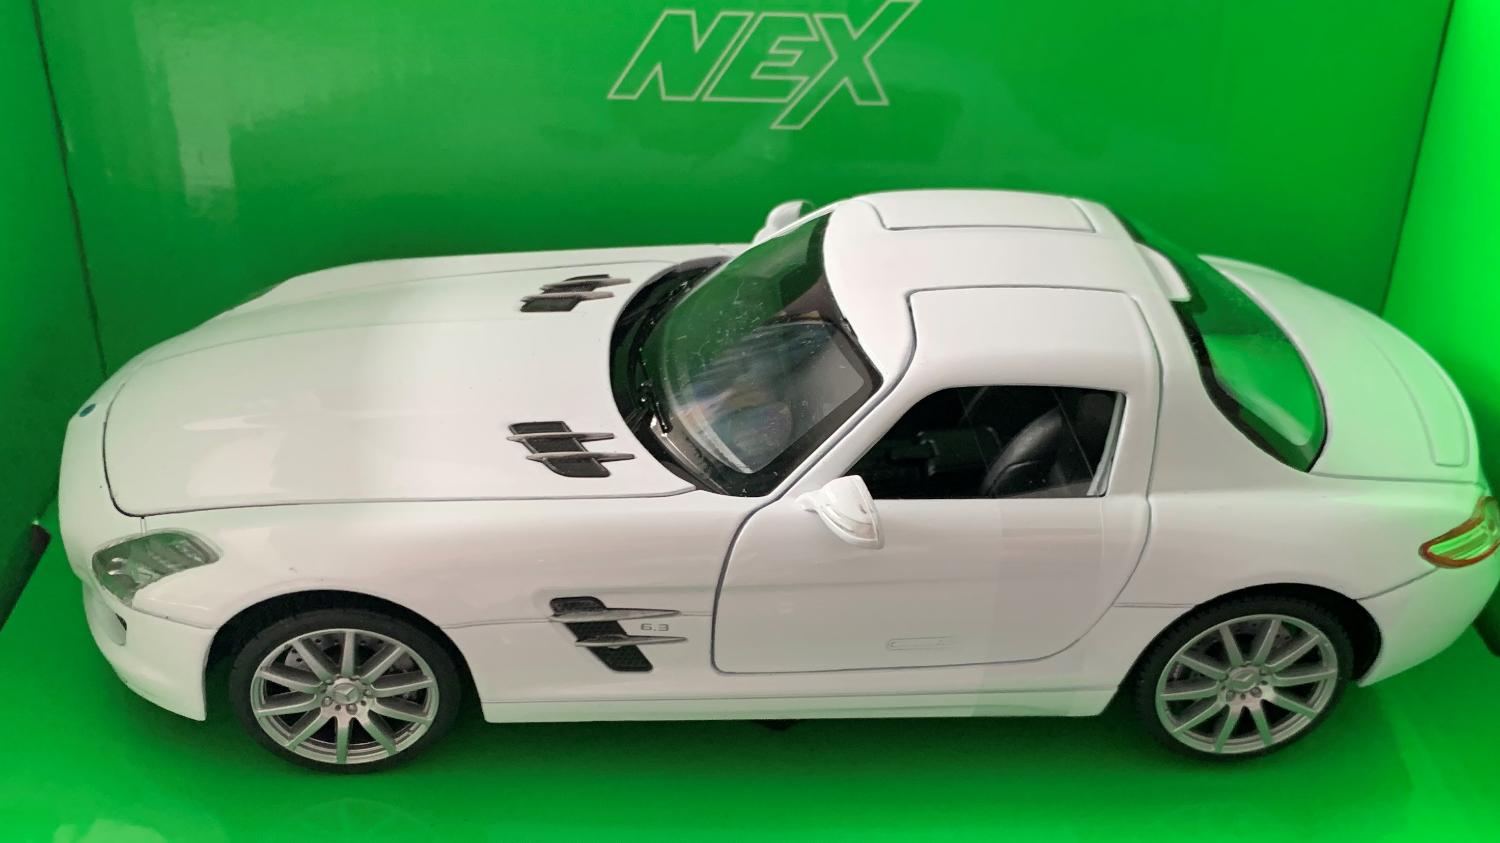 An excellent reproduction of the Mercedes Benz SLS AMG with high level of detail throughout, all authentically recreated.